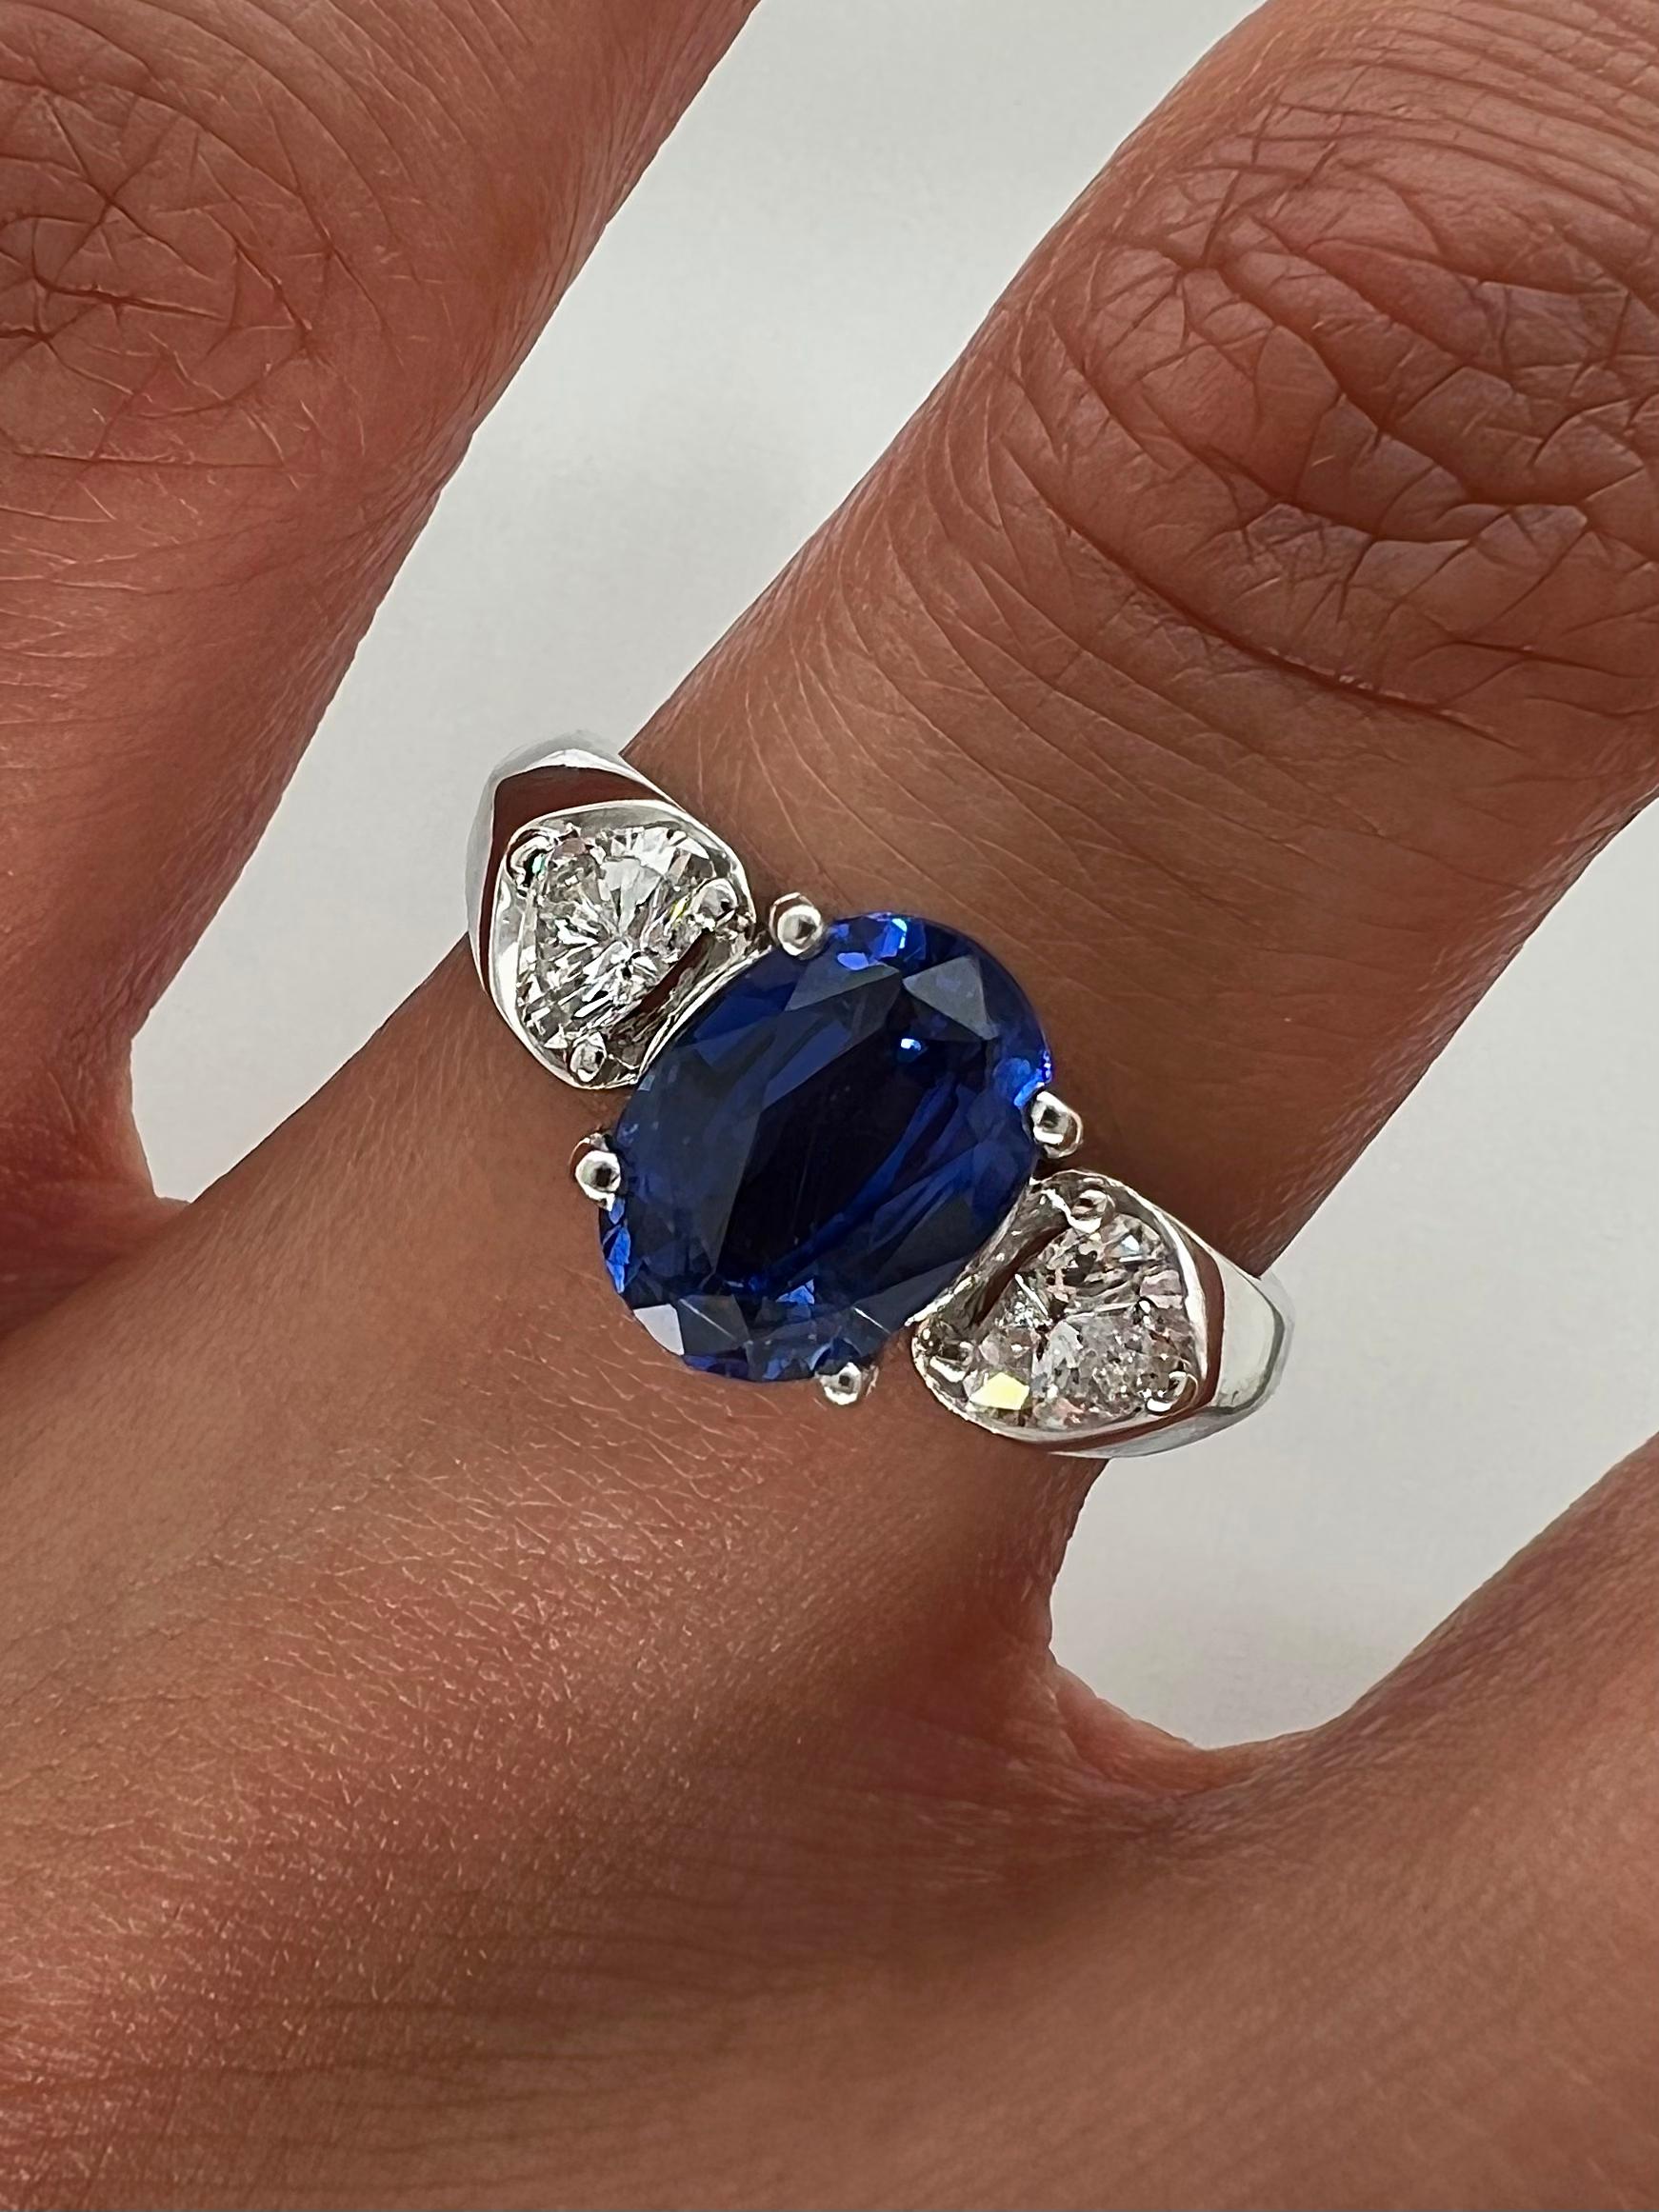 Oval Cut 3.07 Total Carat Blue Sapphire and Diamond Engagement Ring For Sale